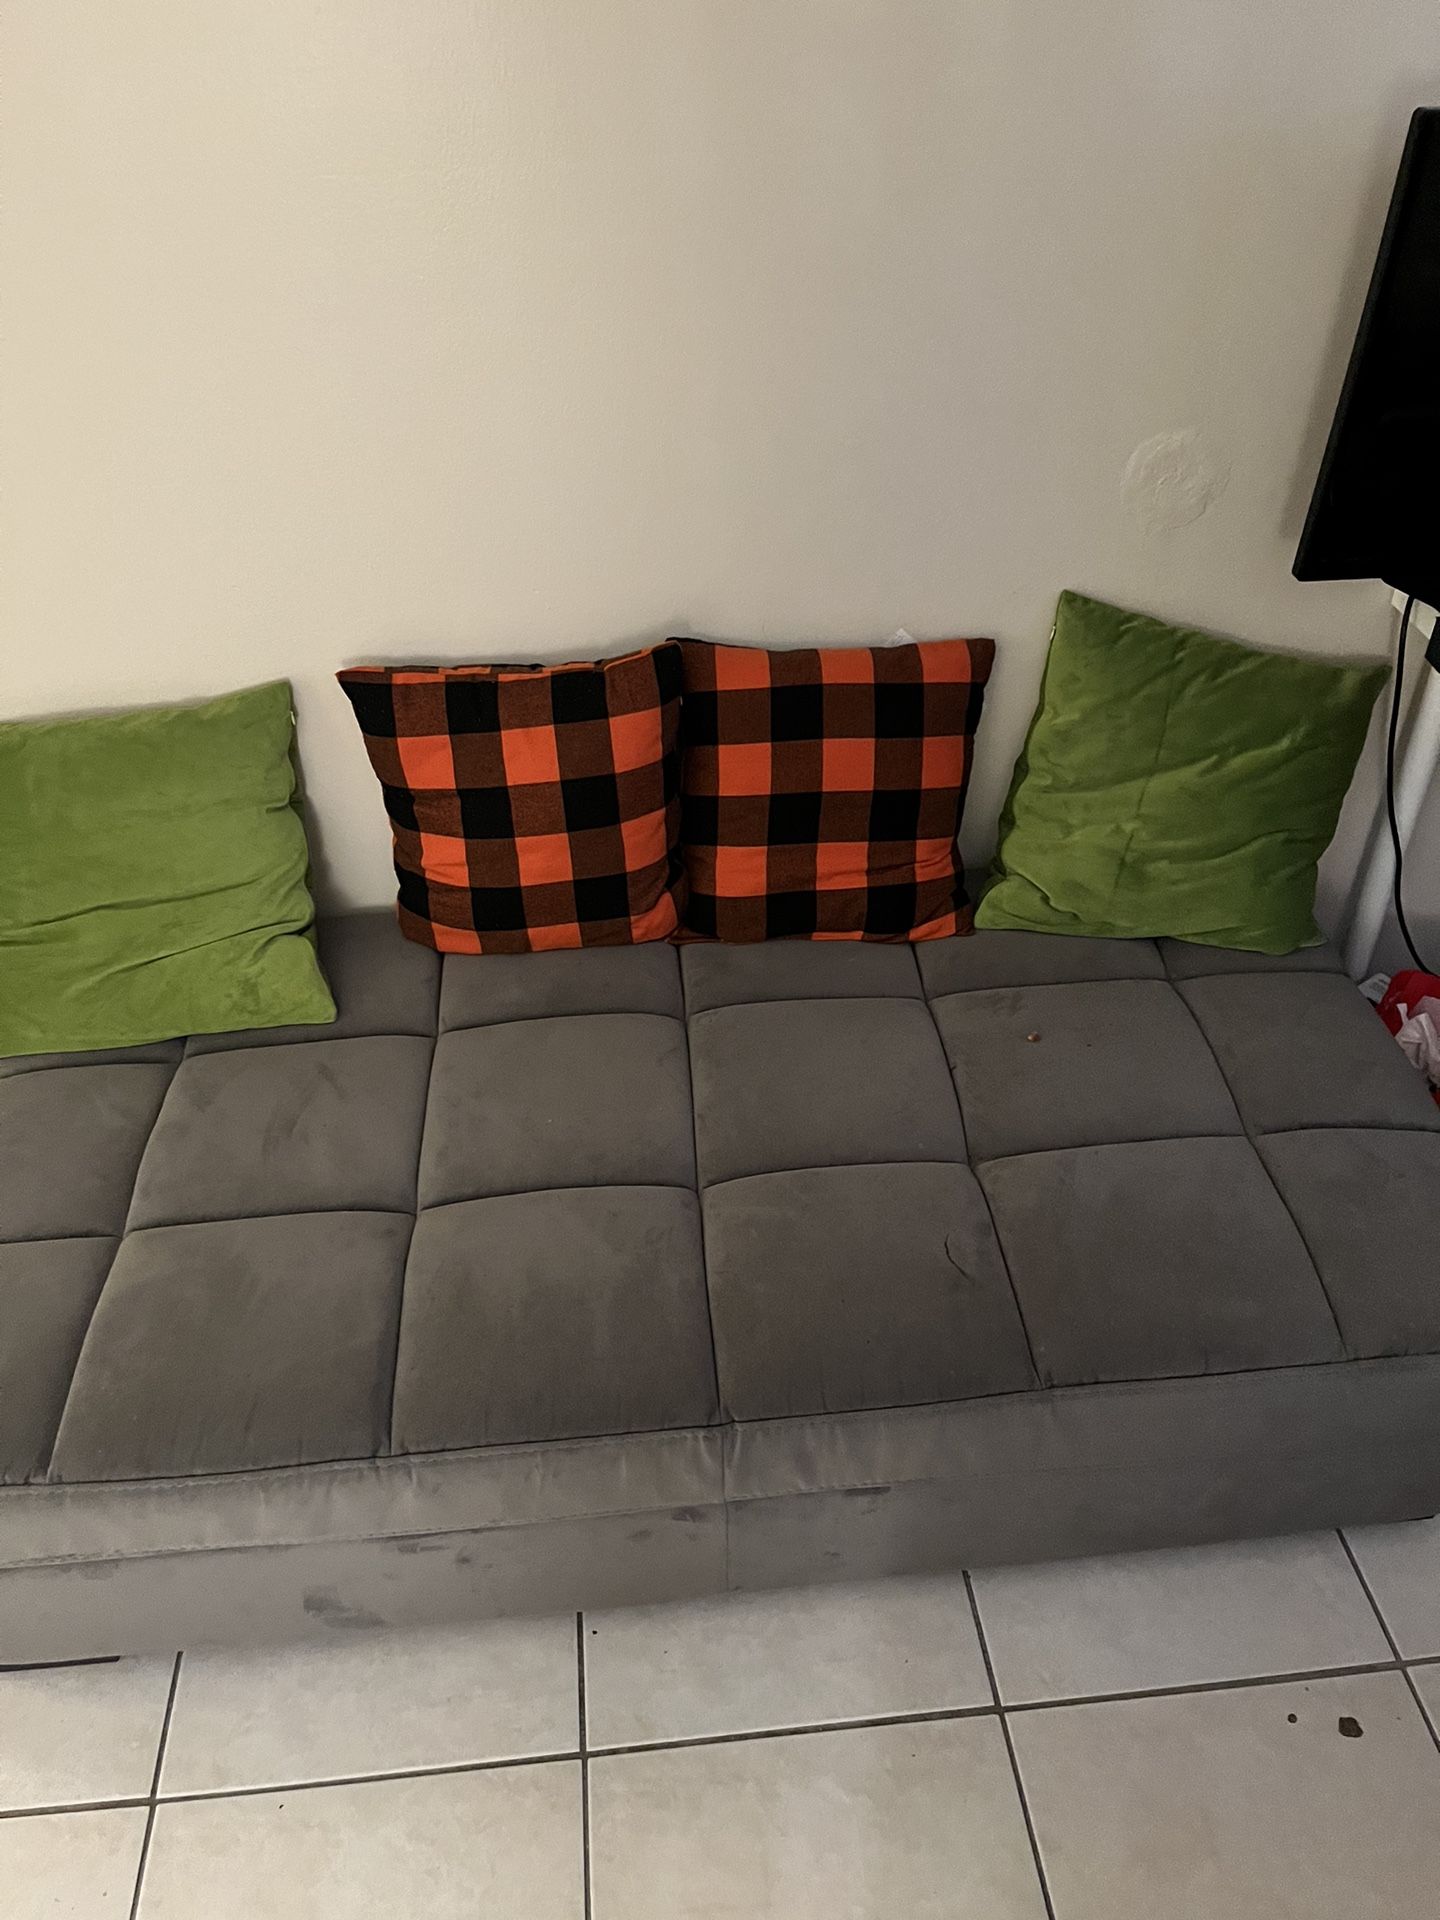 L Shaped Couch With Pillows For Sale